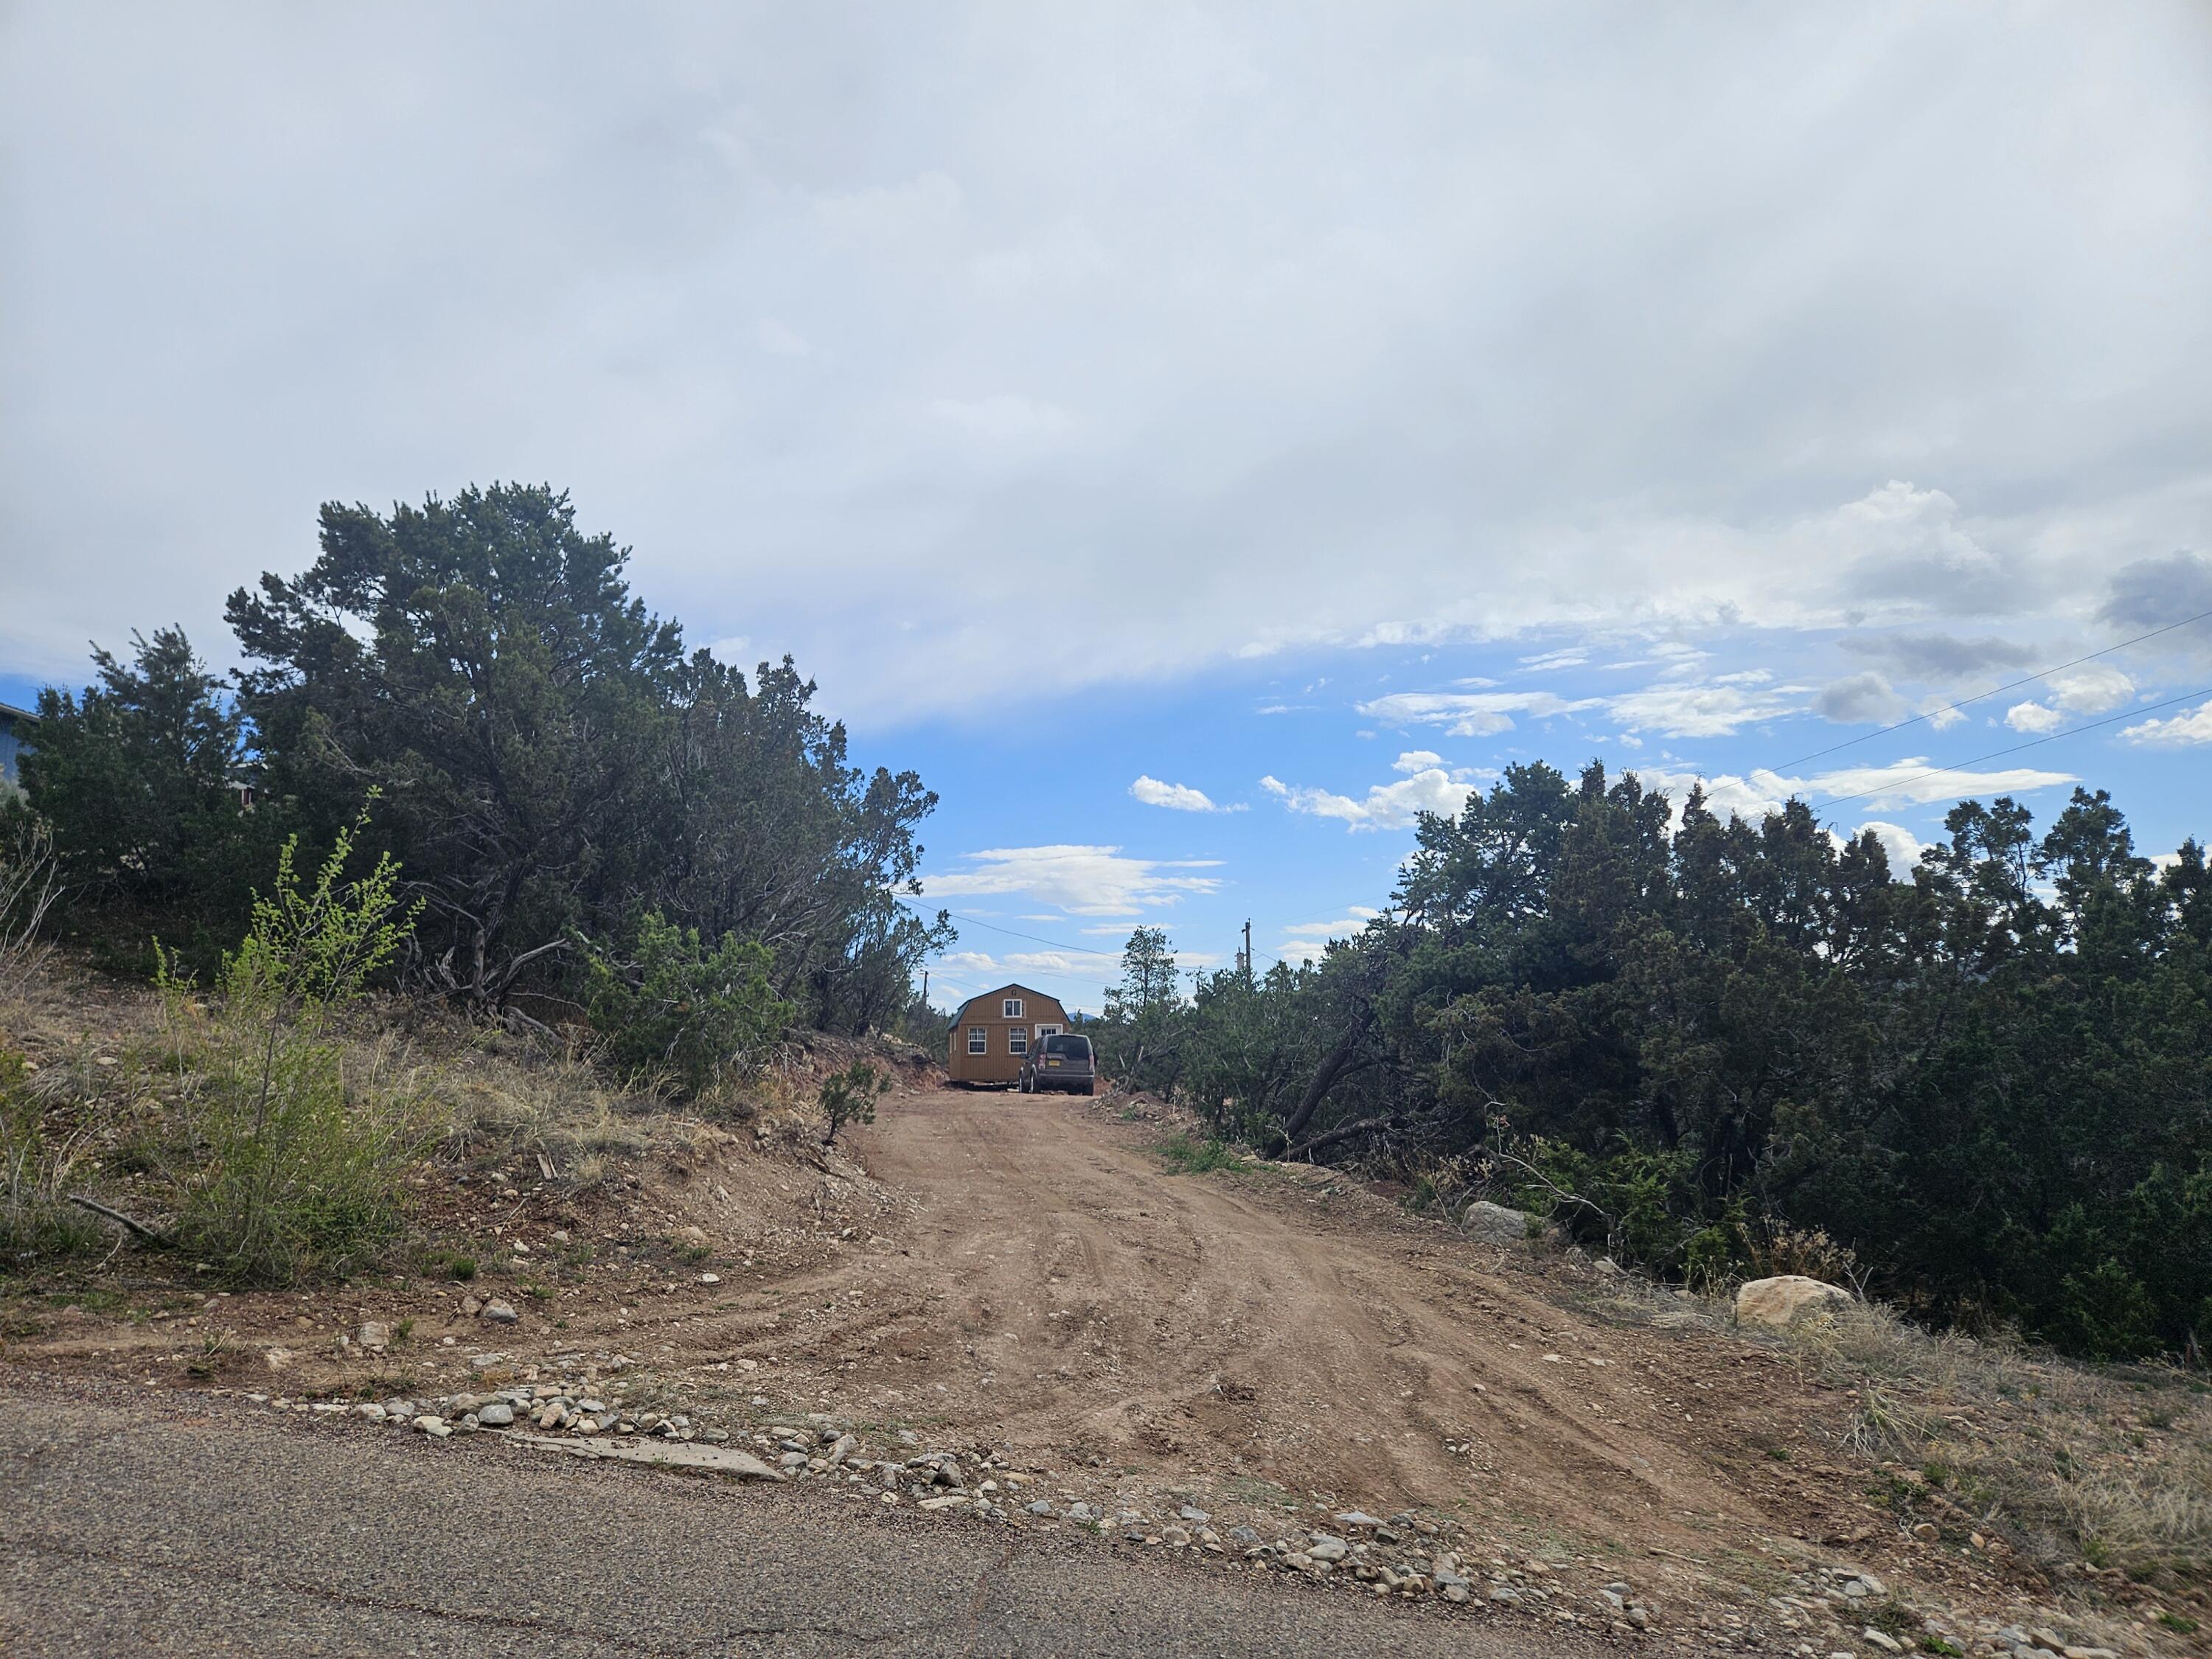 36 Pinon Heights Road, Sandia Park, New Mexico 87047, ,Land,For Sale,36 Pinon Heights Road,1061283